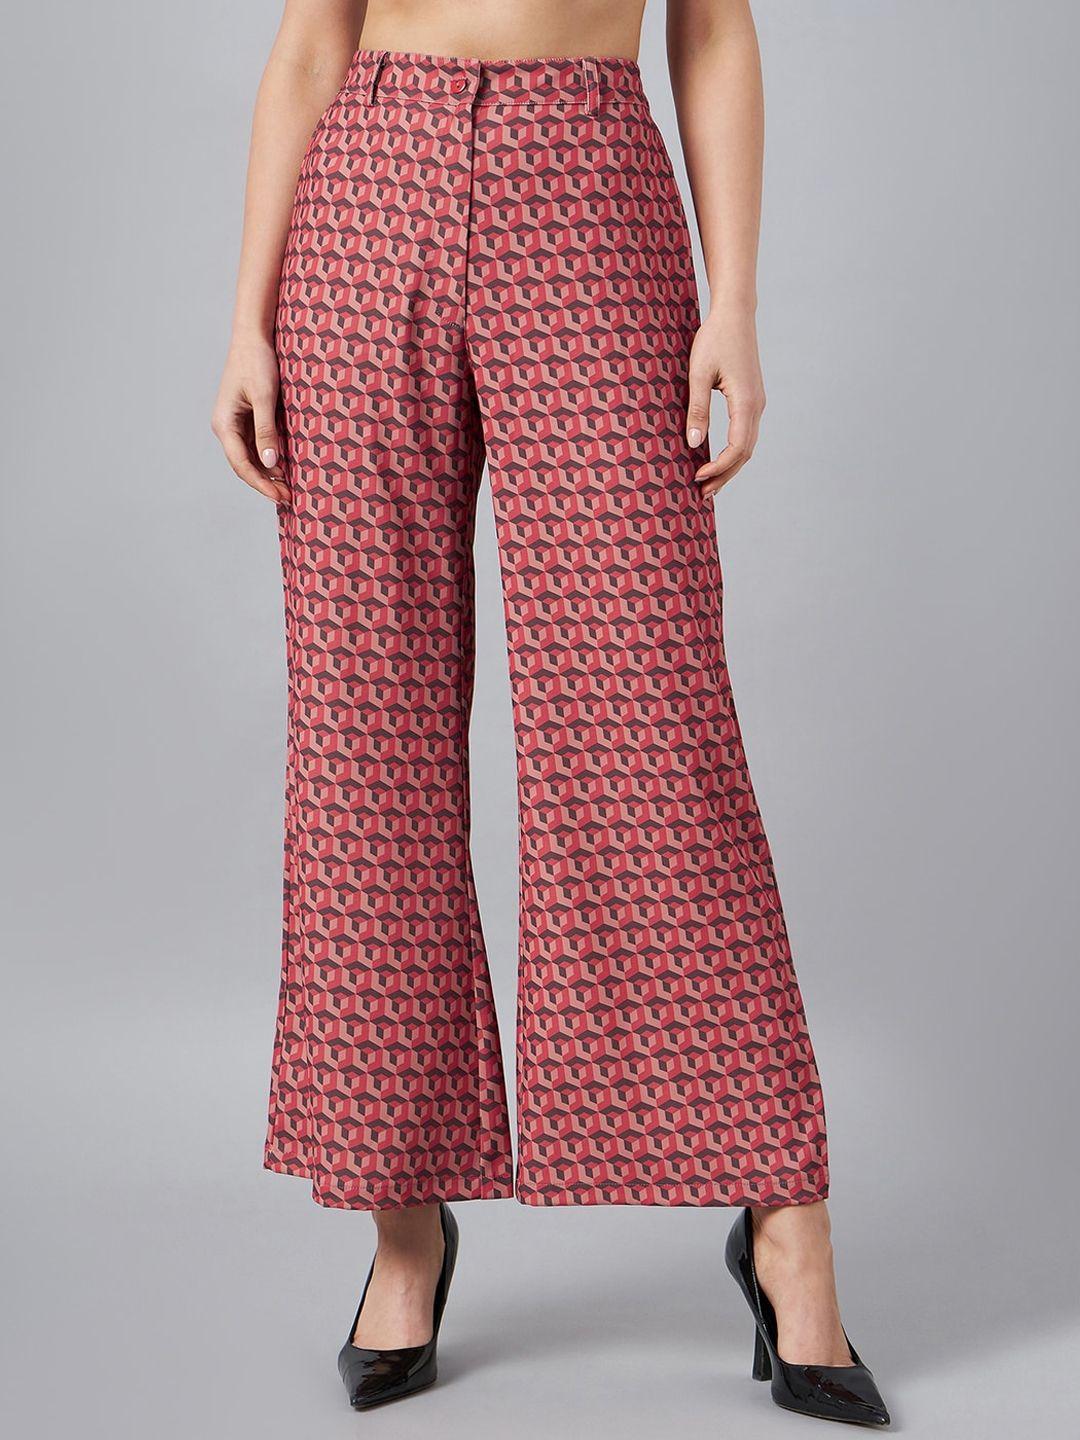 marie claire women printed high-rise trousers